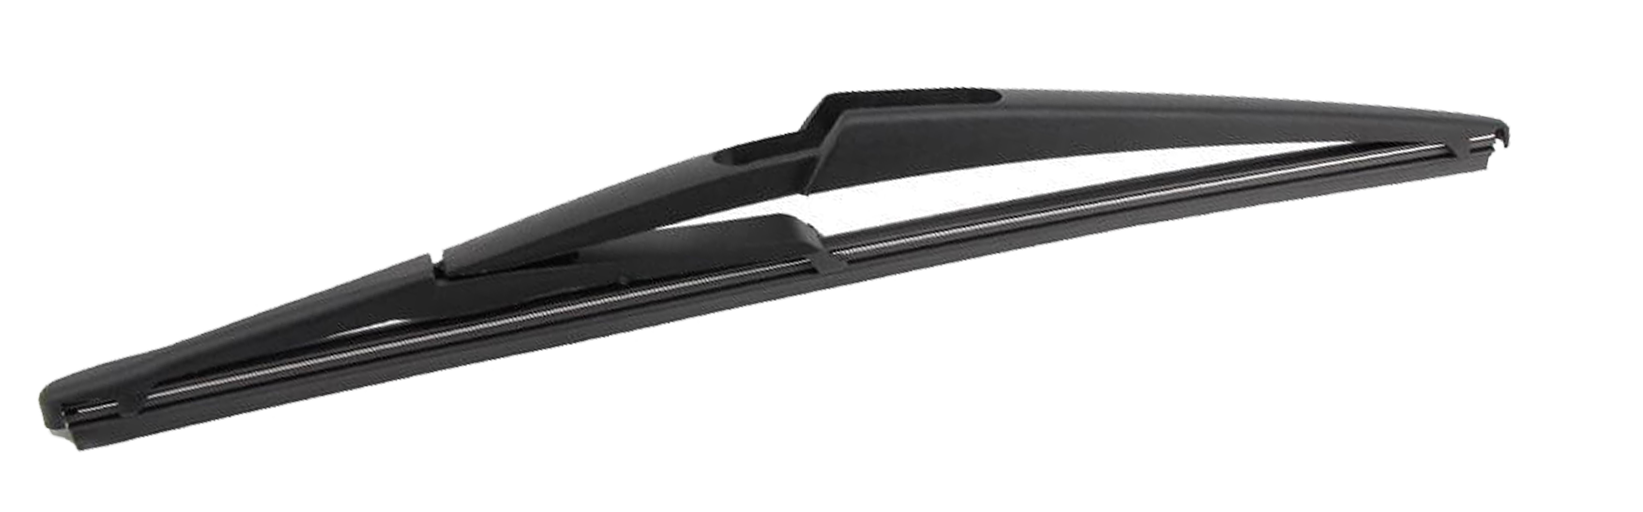 Rear Wiper Blade for Mercedes Benz C-Class 2009-2012 (S204 Facelift I) Wagon 